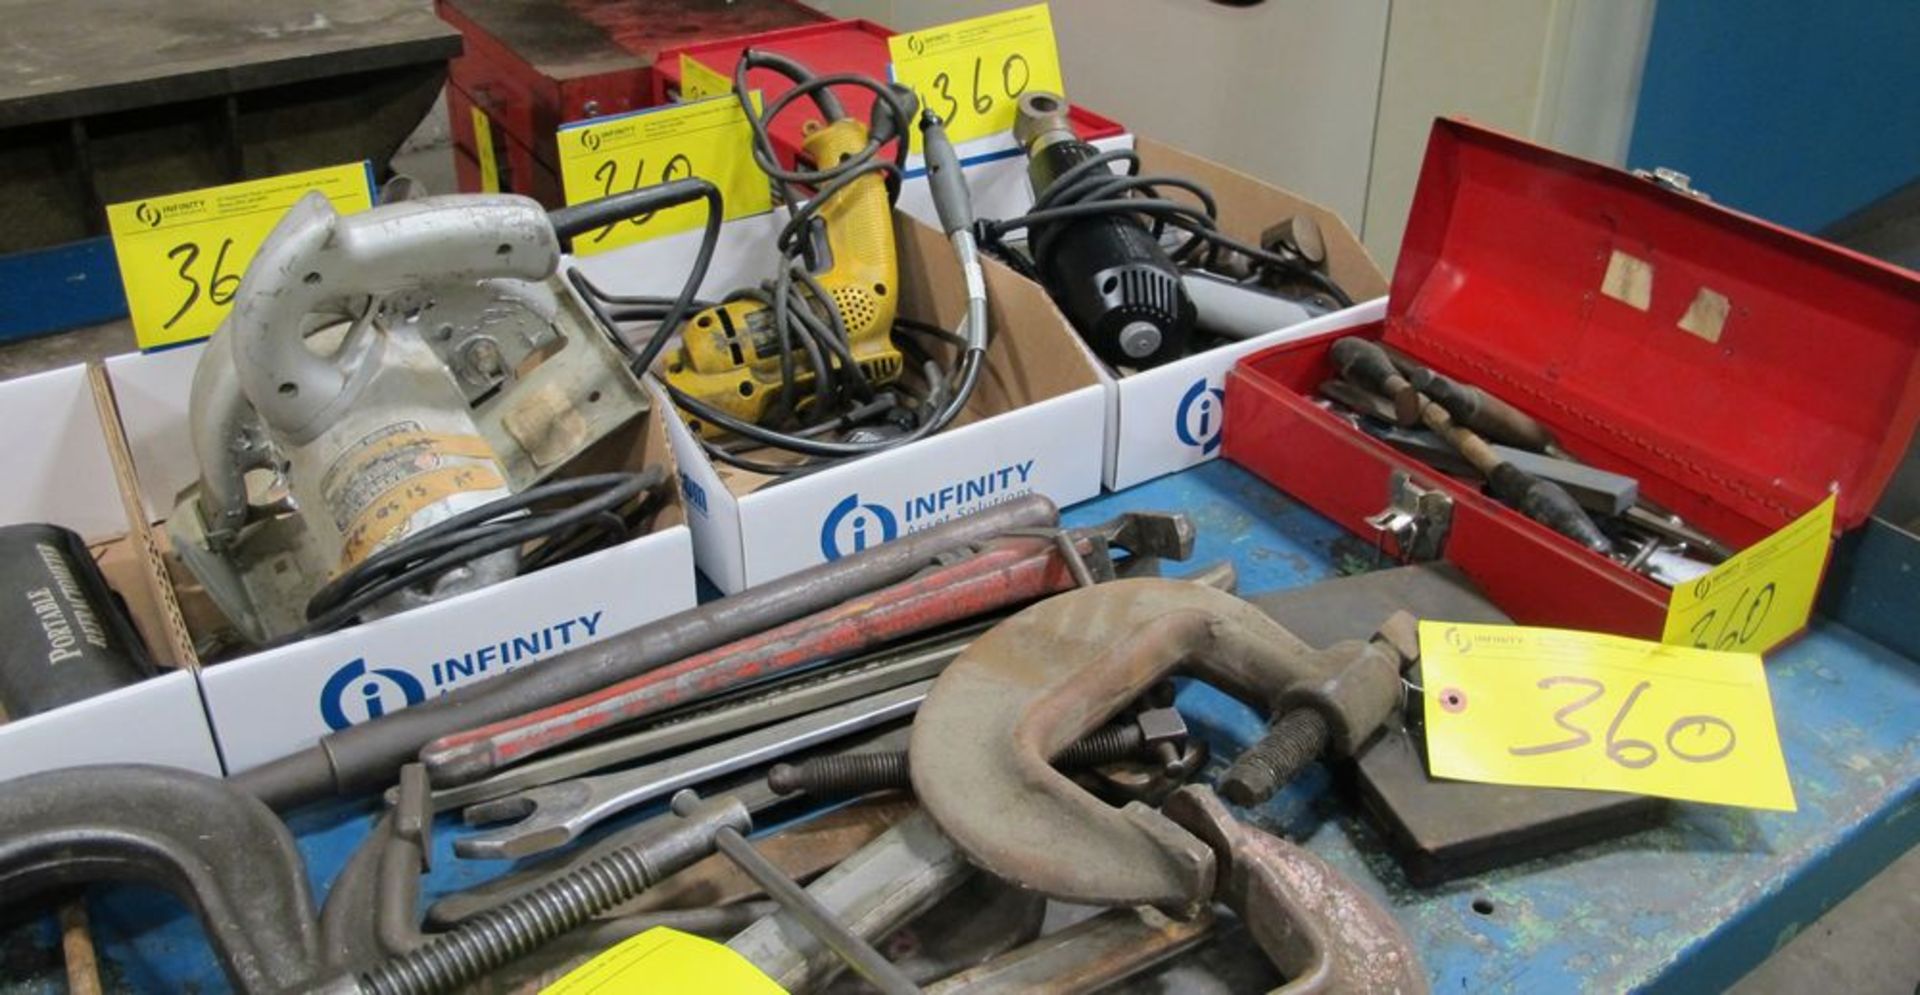 LOT ASST. POWER TOOLS, HAND TOOLS, CLAMPS, ETC. - Image 3 of 3